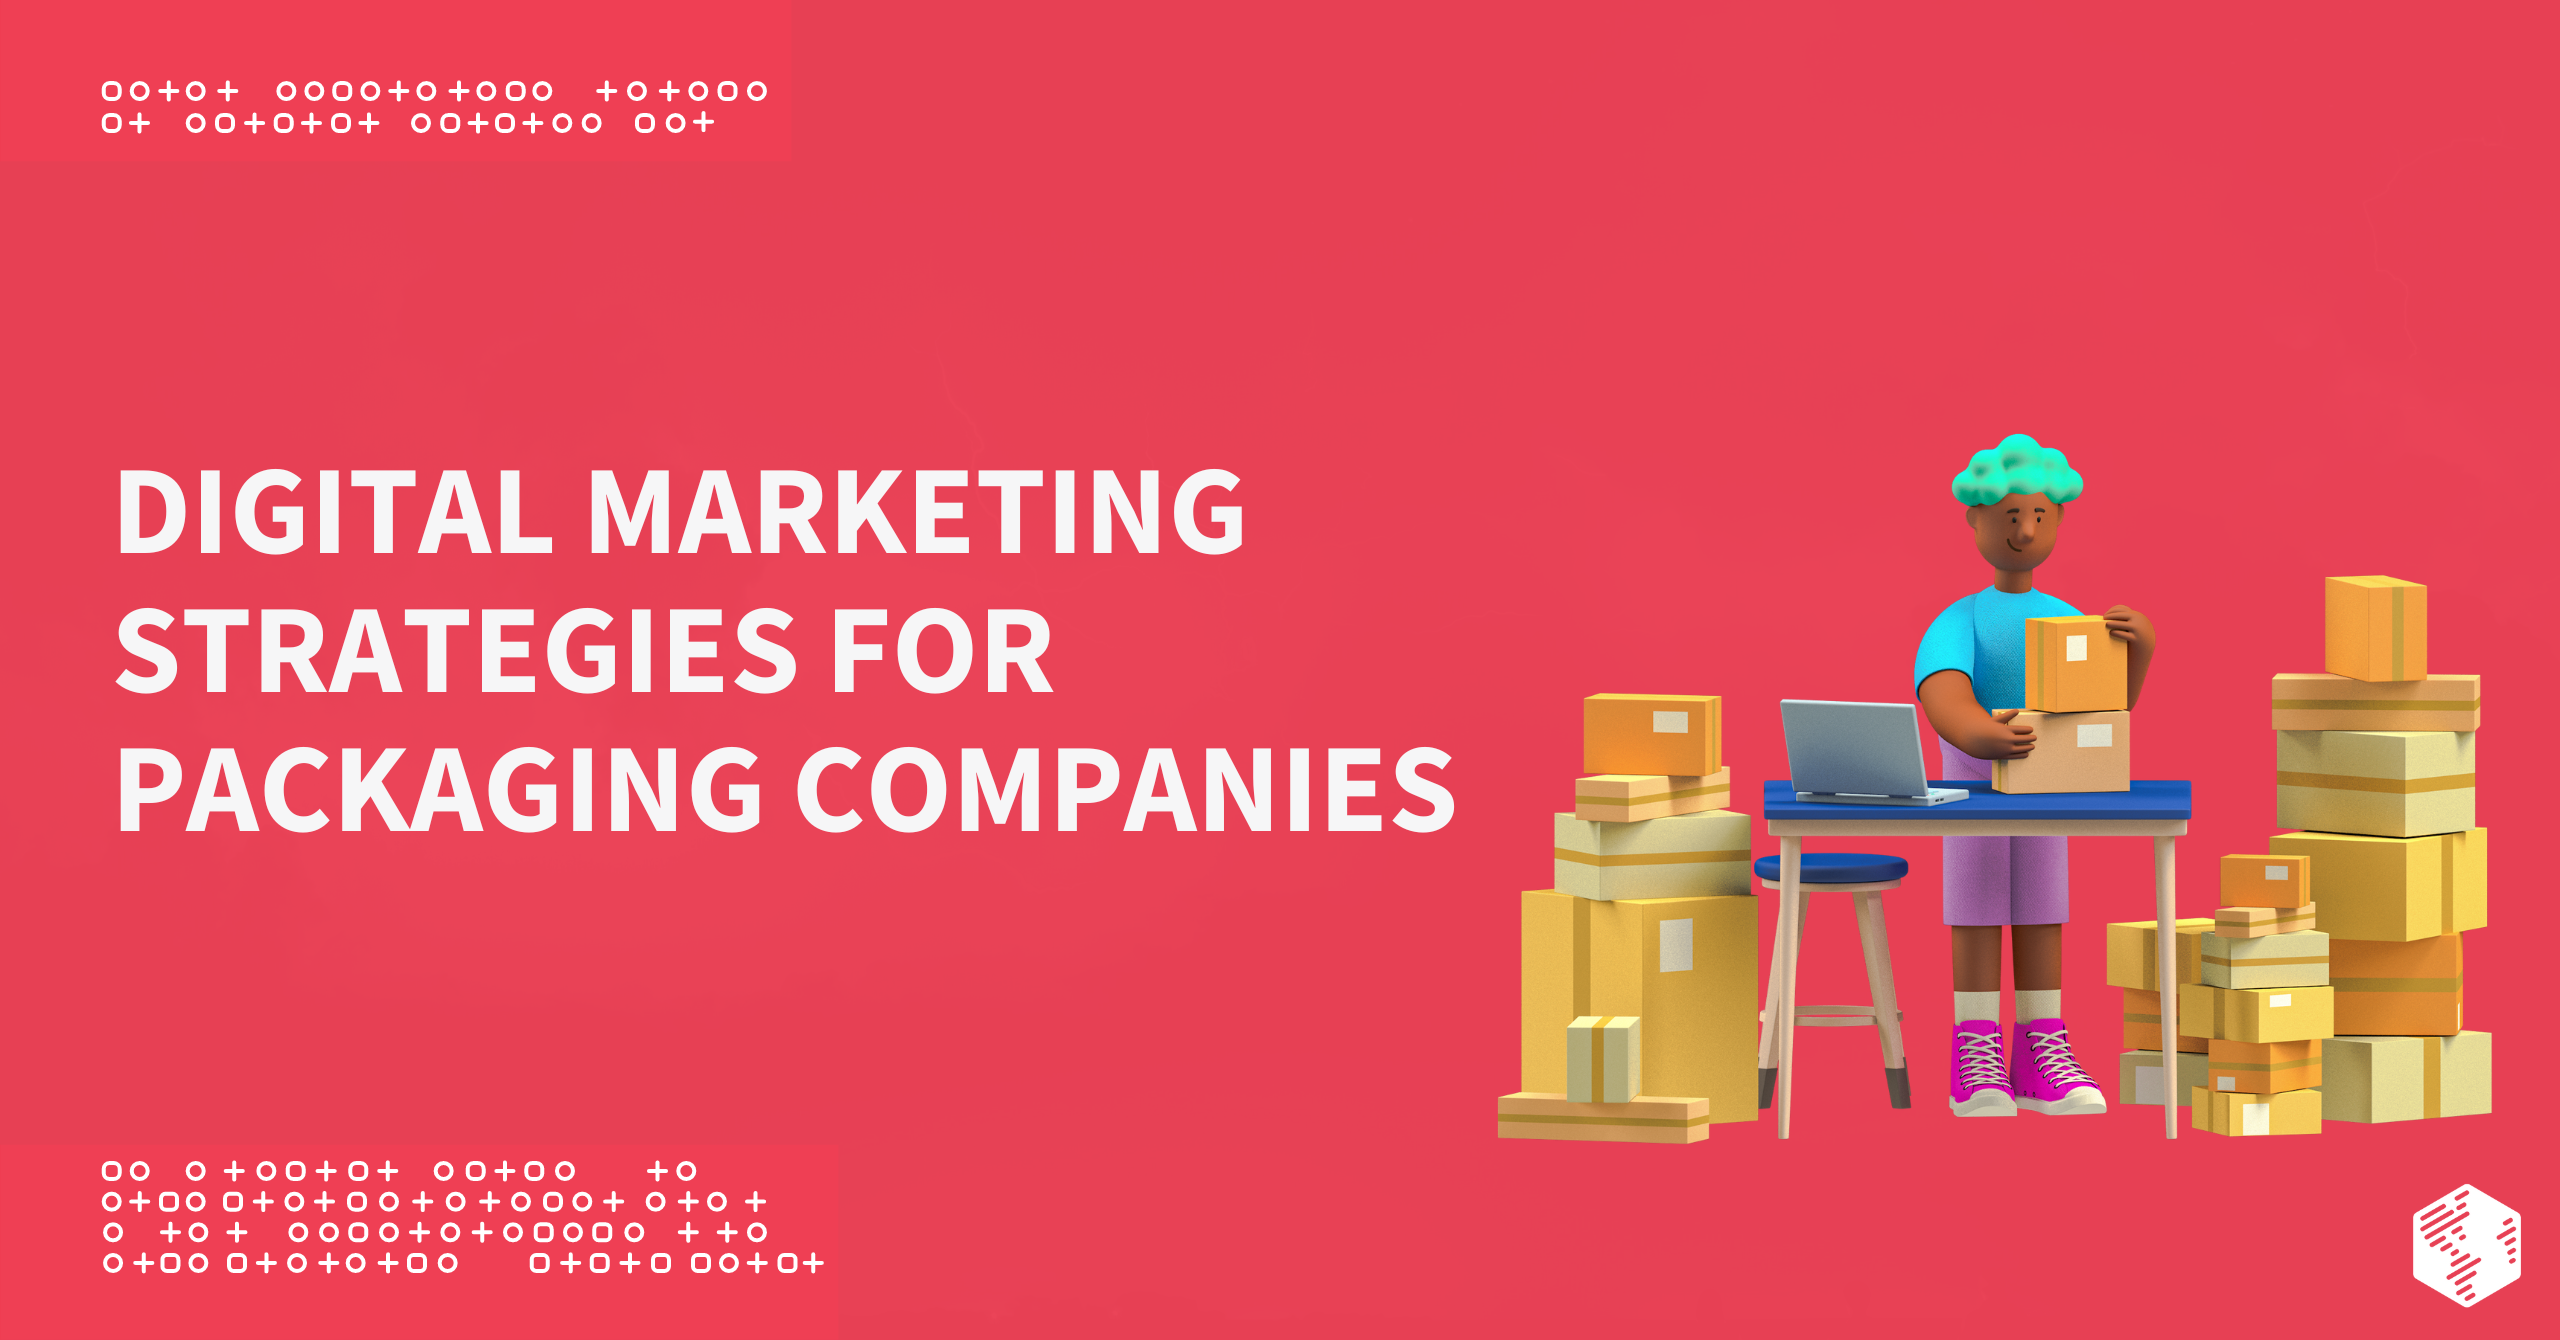 Digital Marketing Strategies for Packaging Companies: What You Need to Know